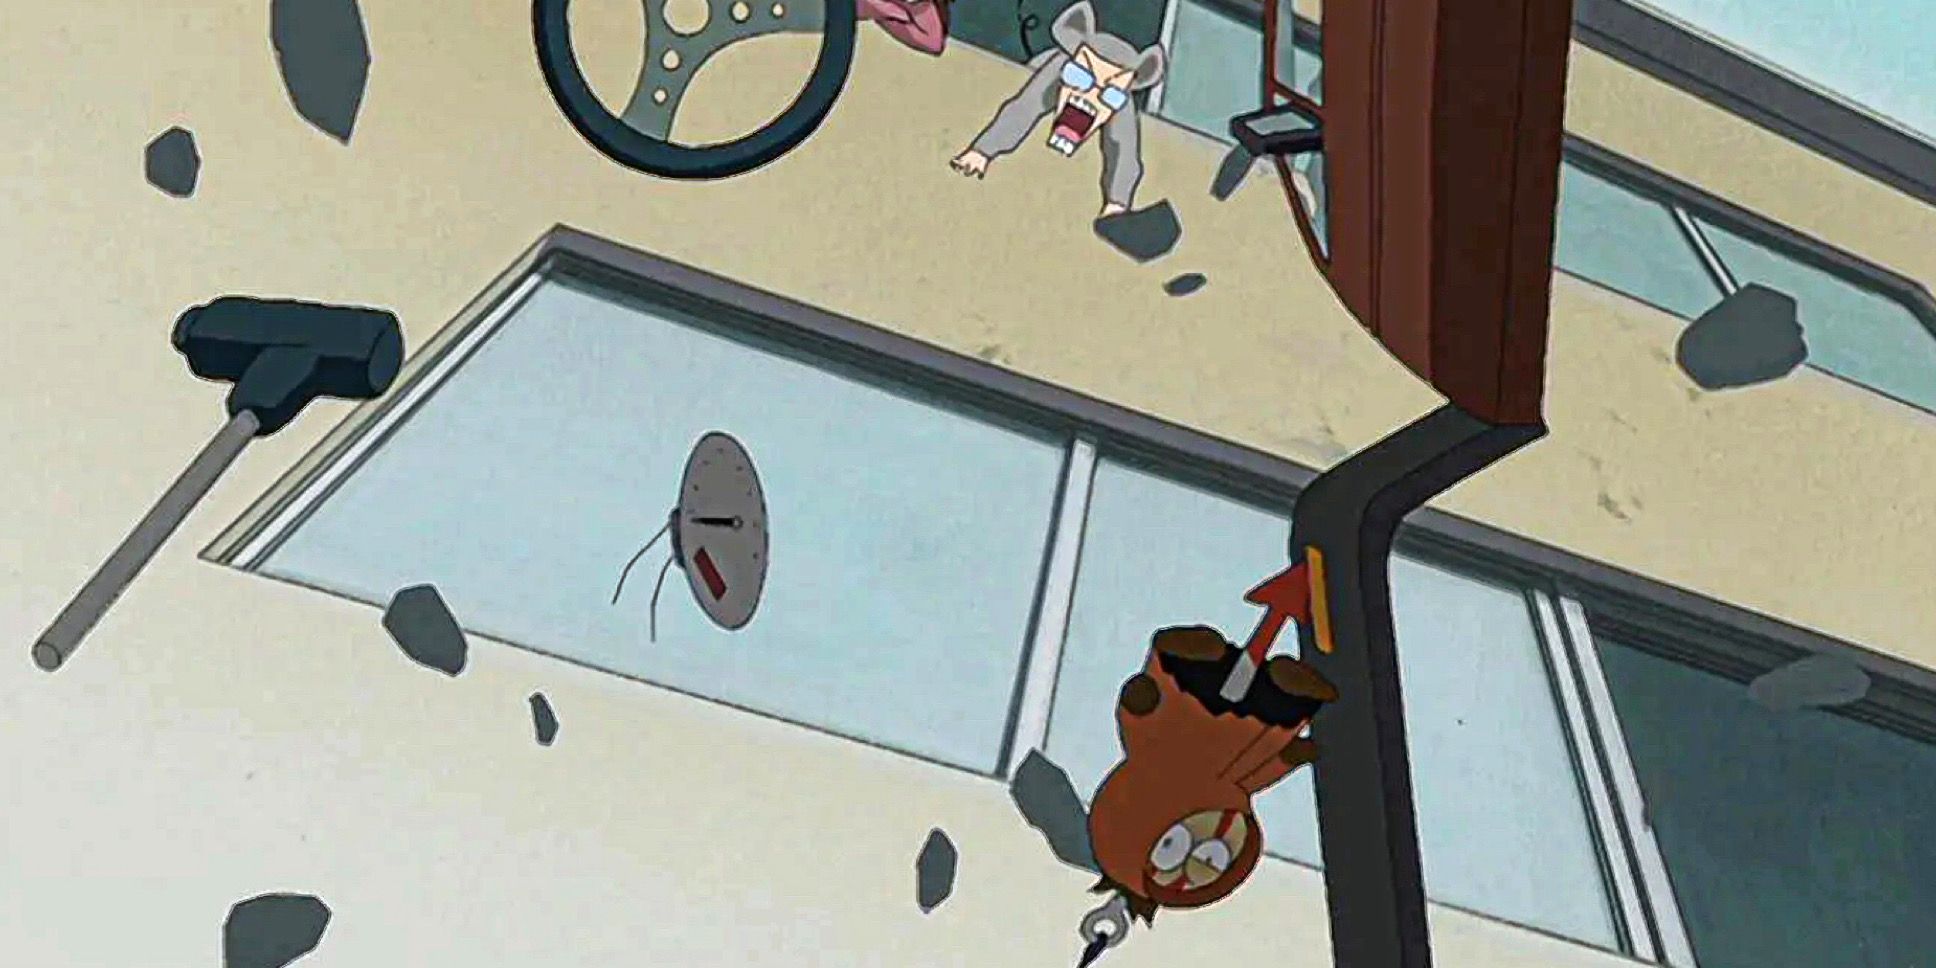 Kenny from South Park Easter egg in FLCL